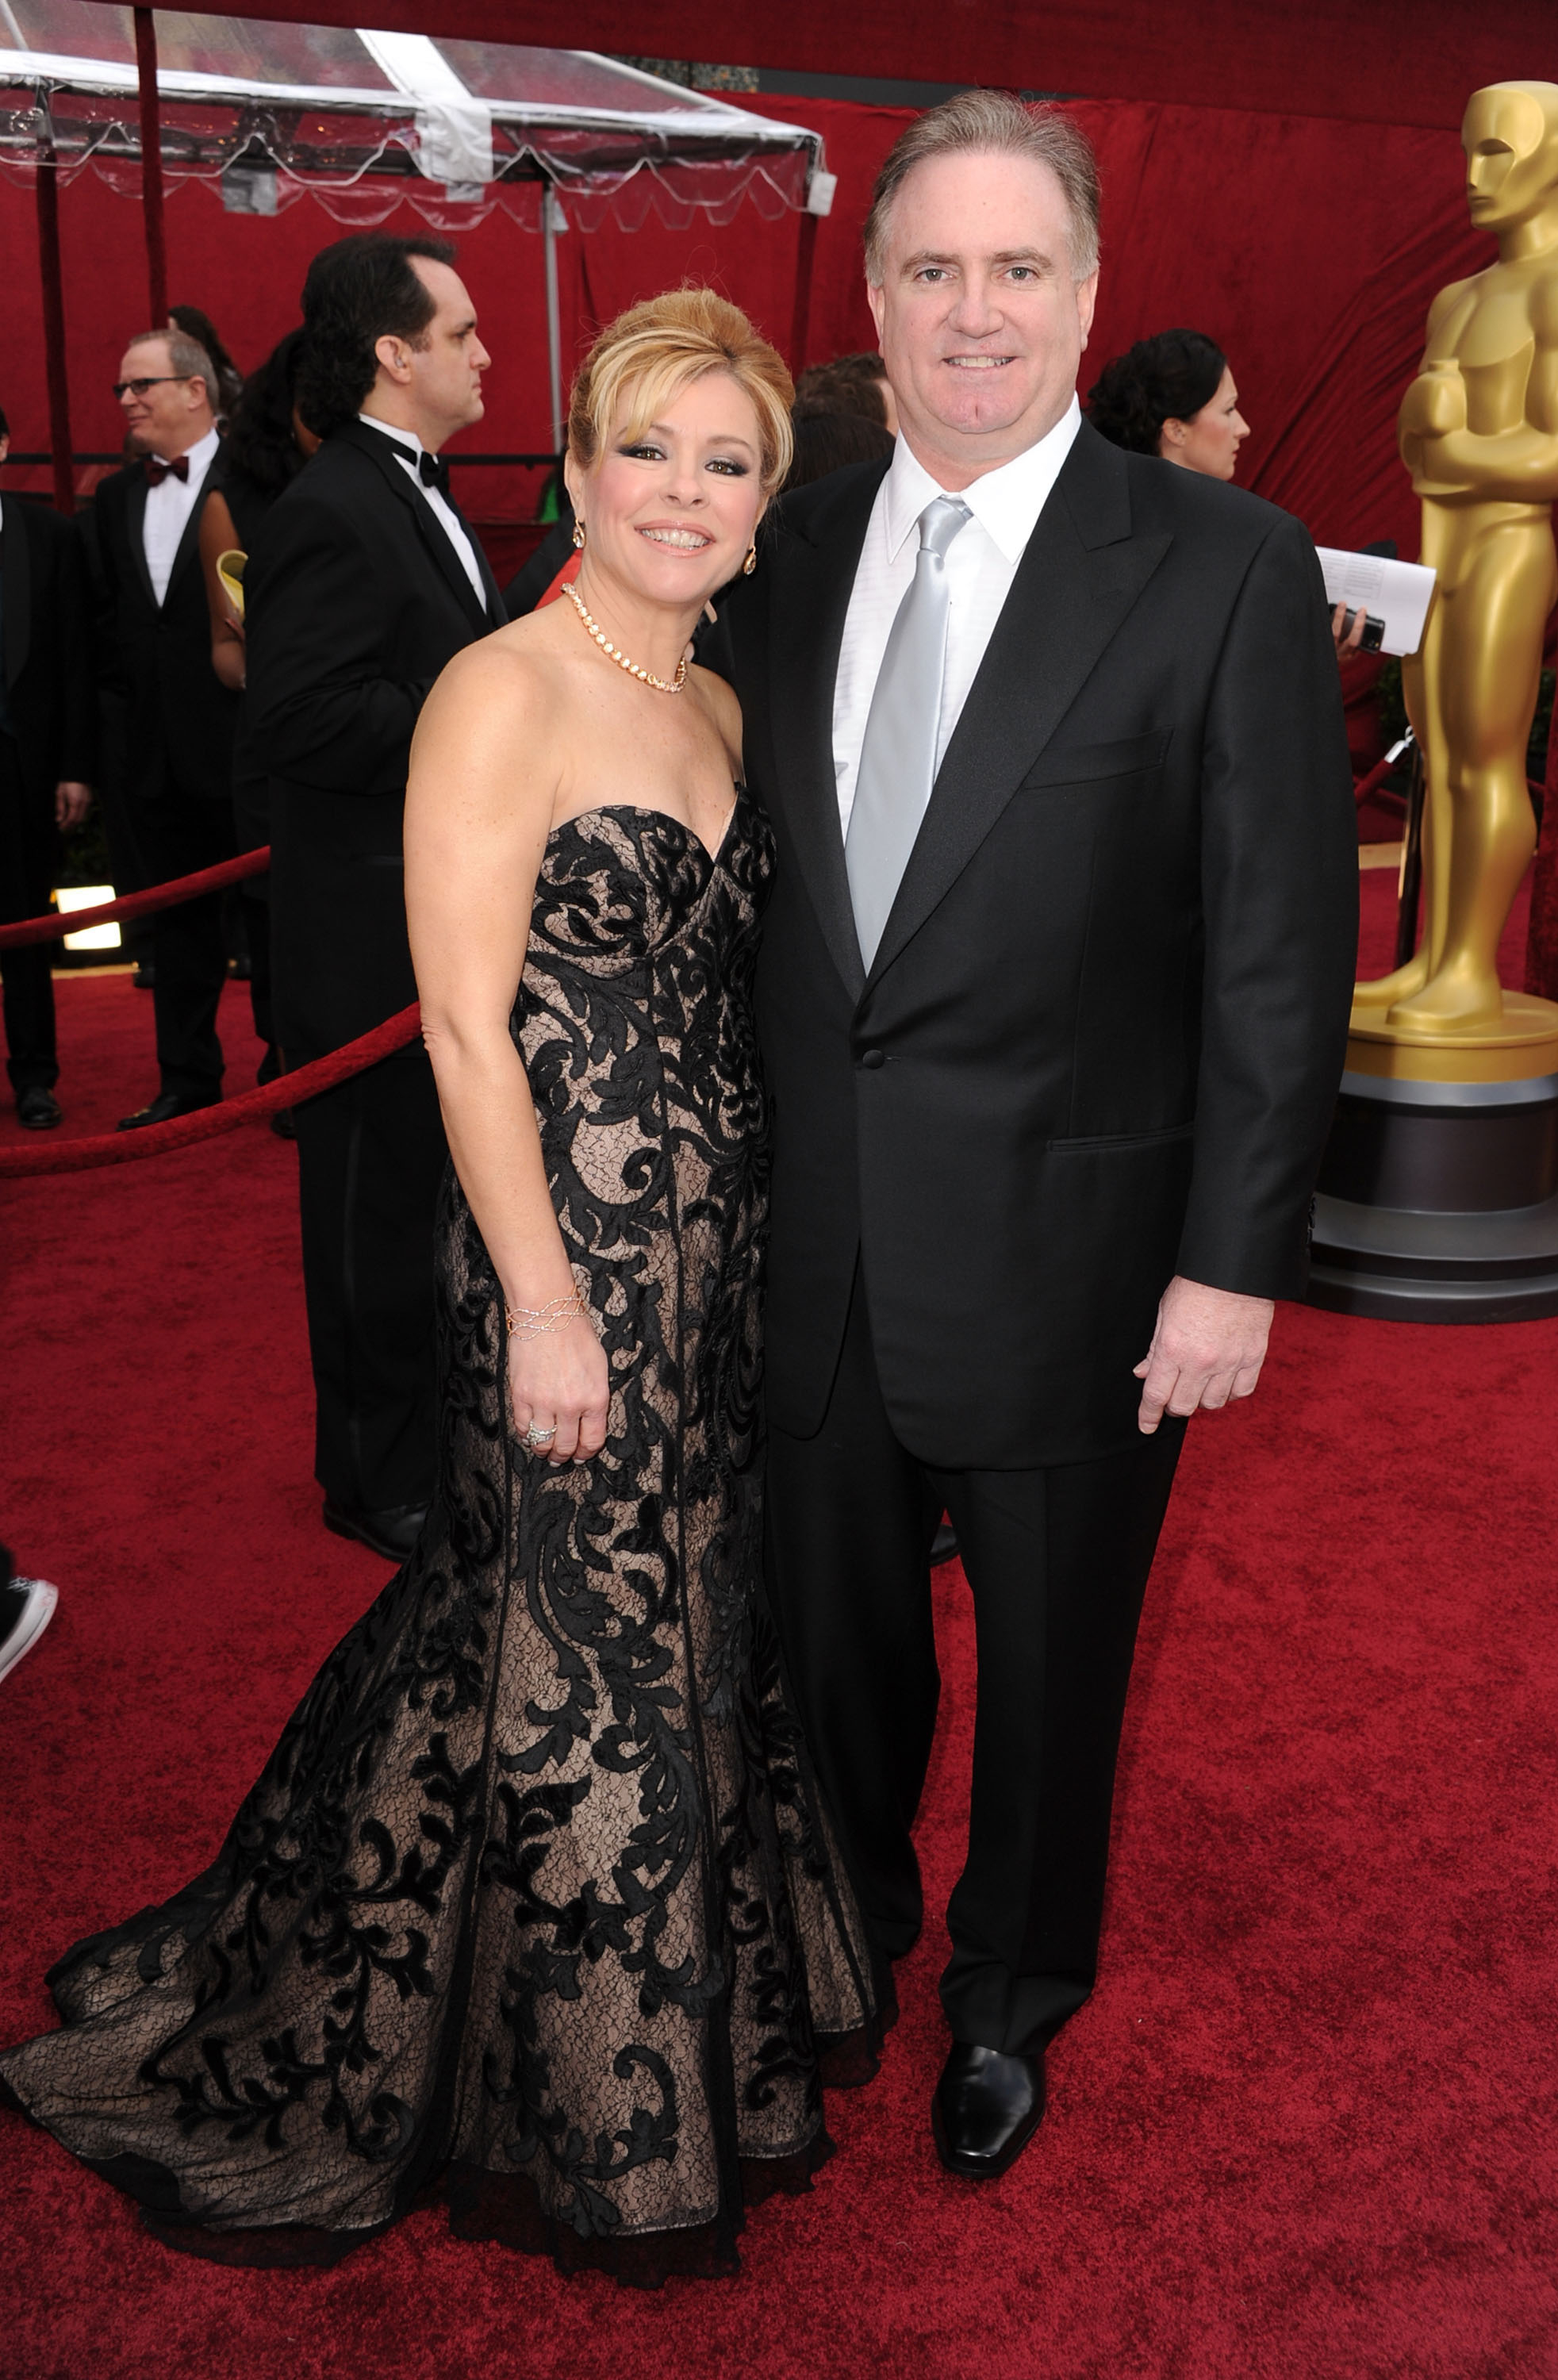 Leigh Anne and Sean Tuohy at the Oscars